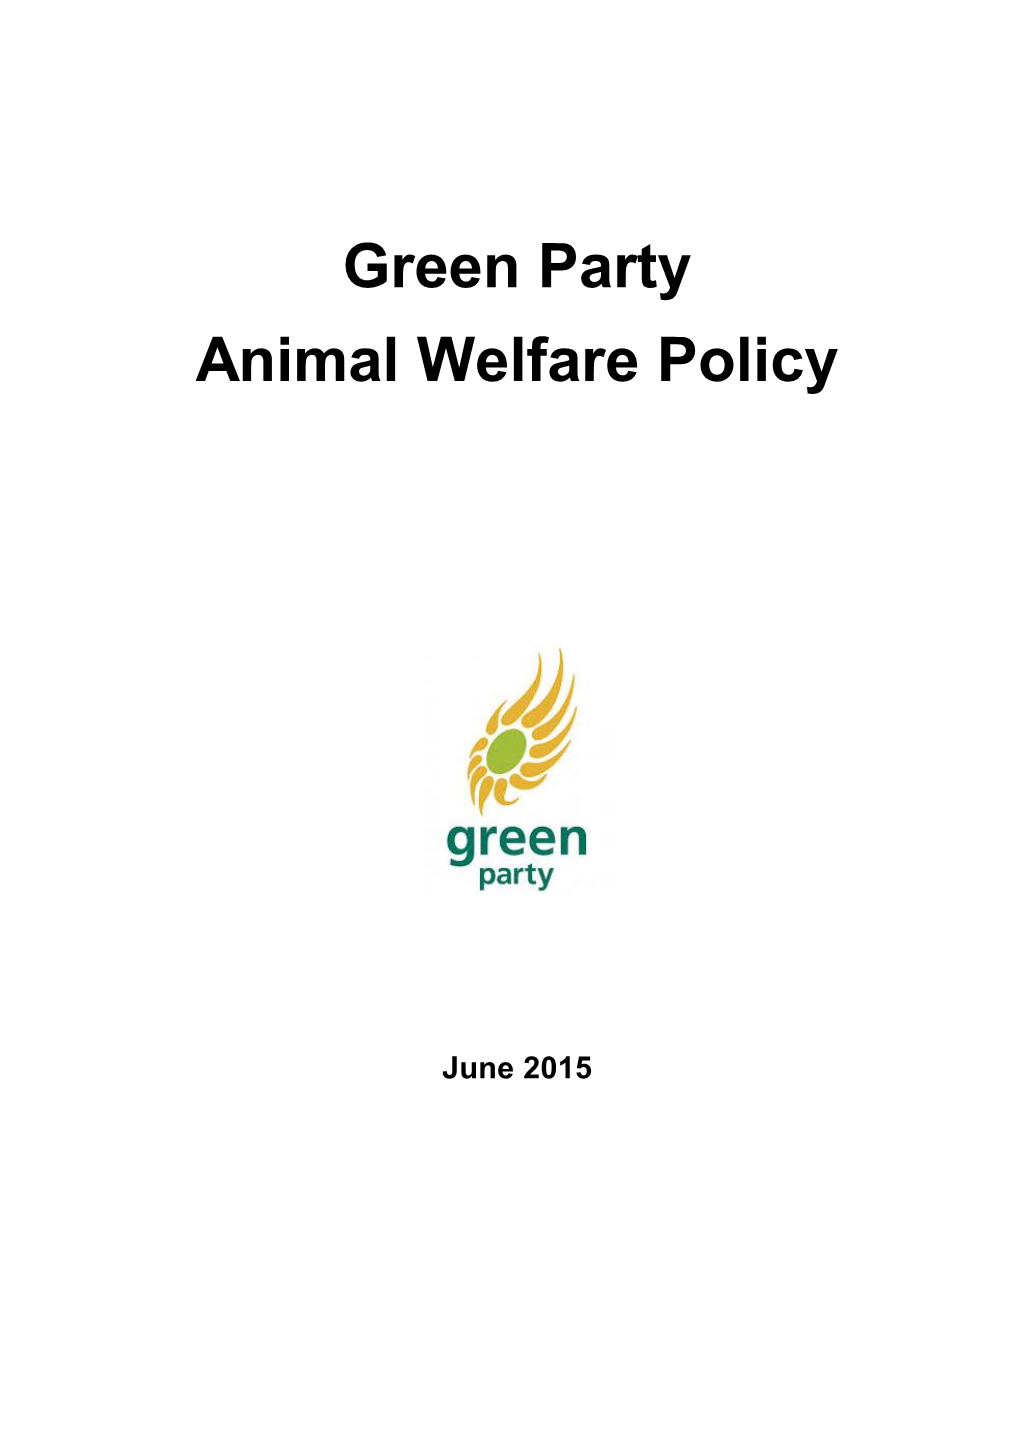 Green Party Animal Welfare Policy